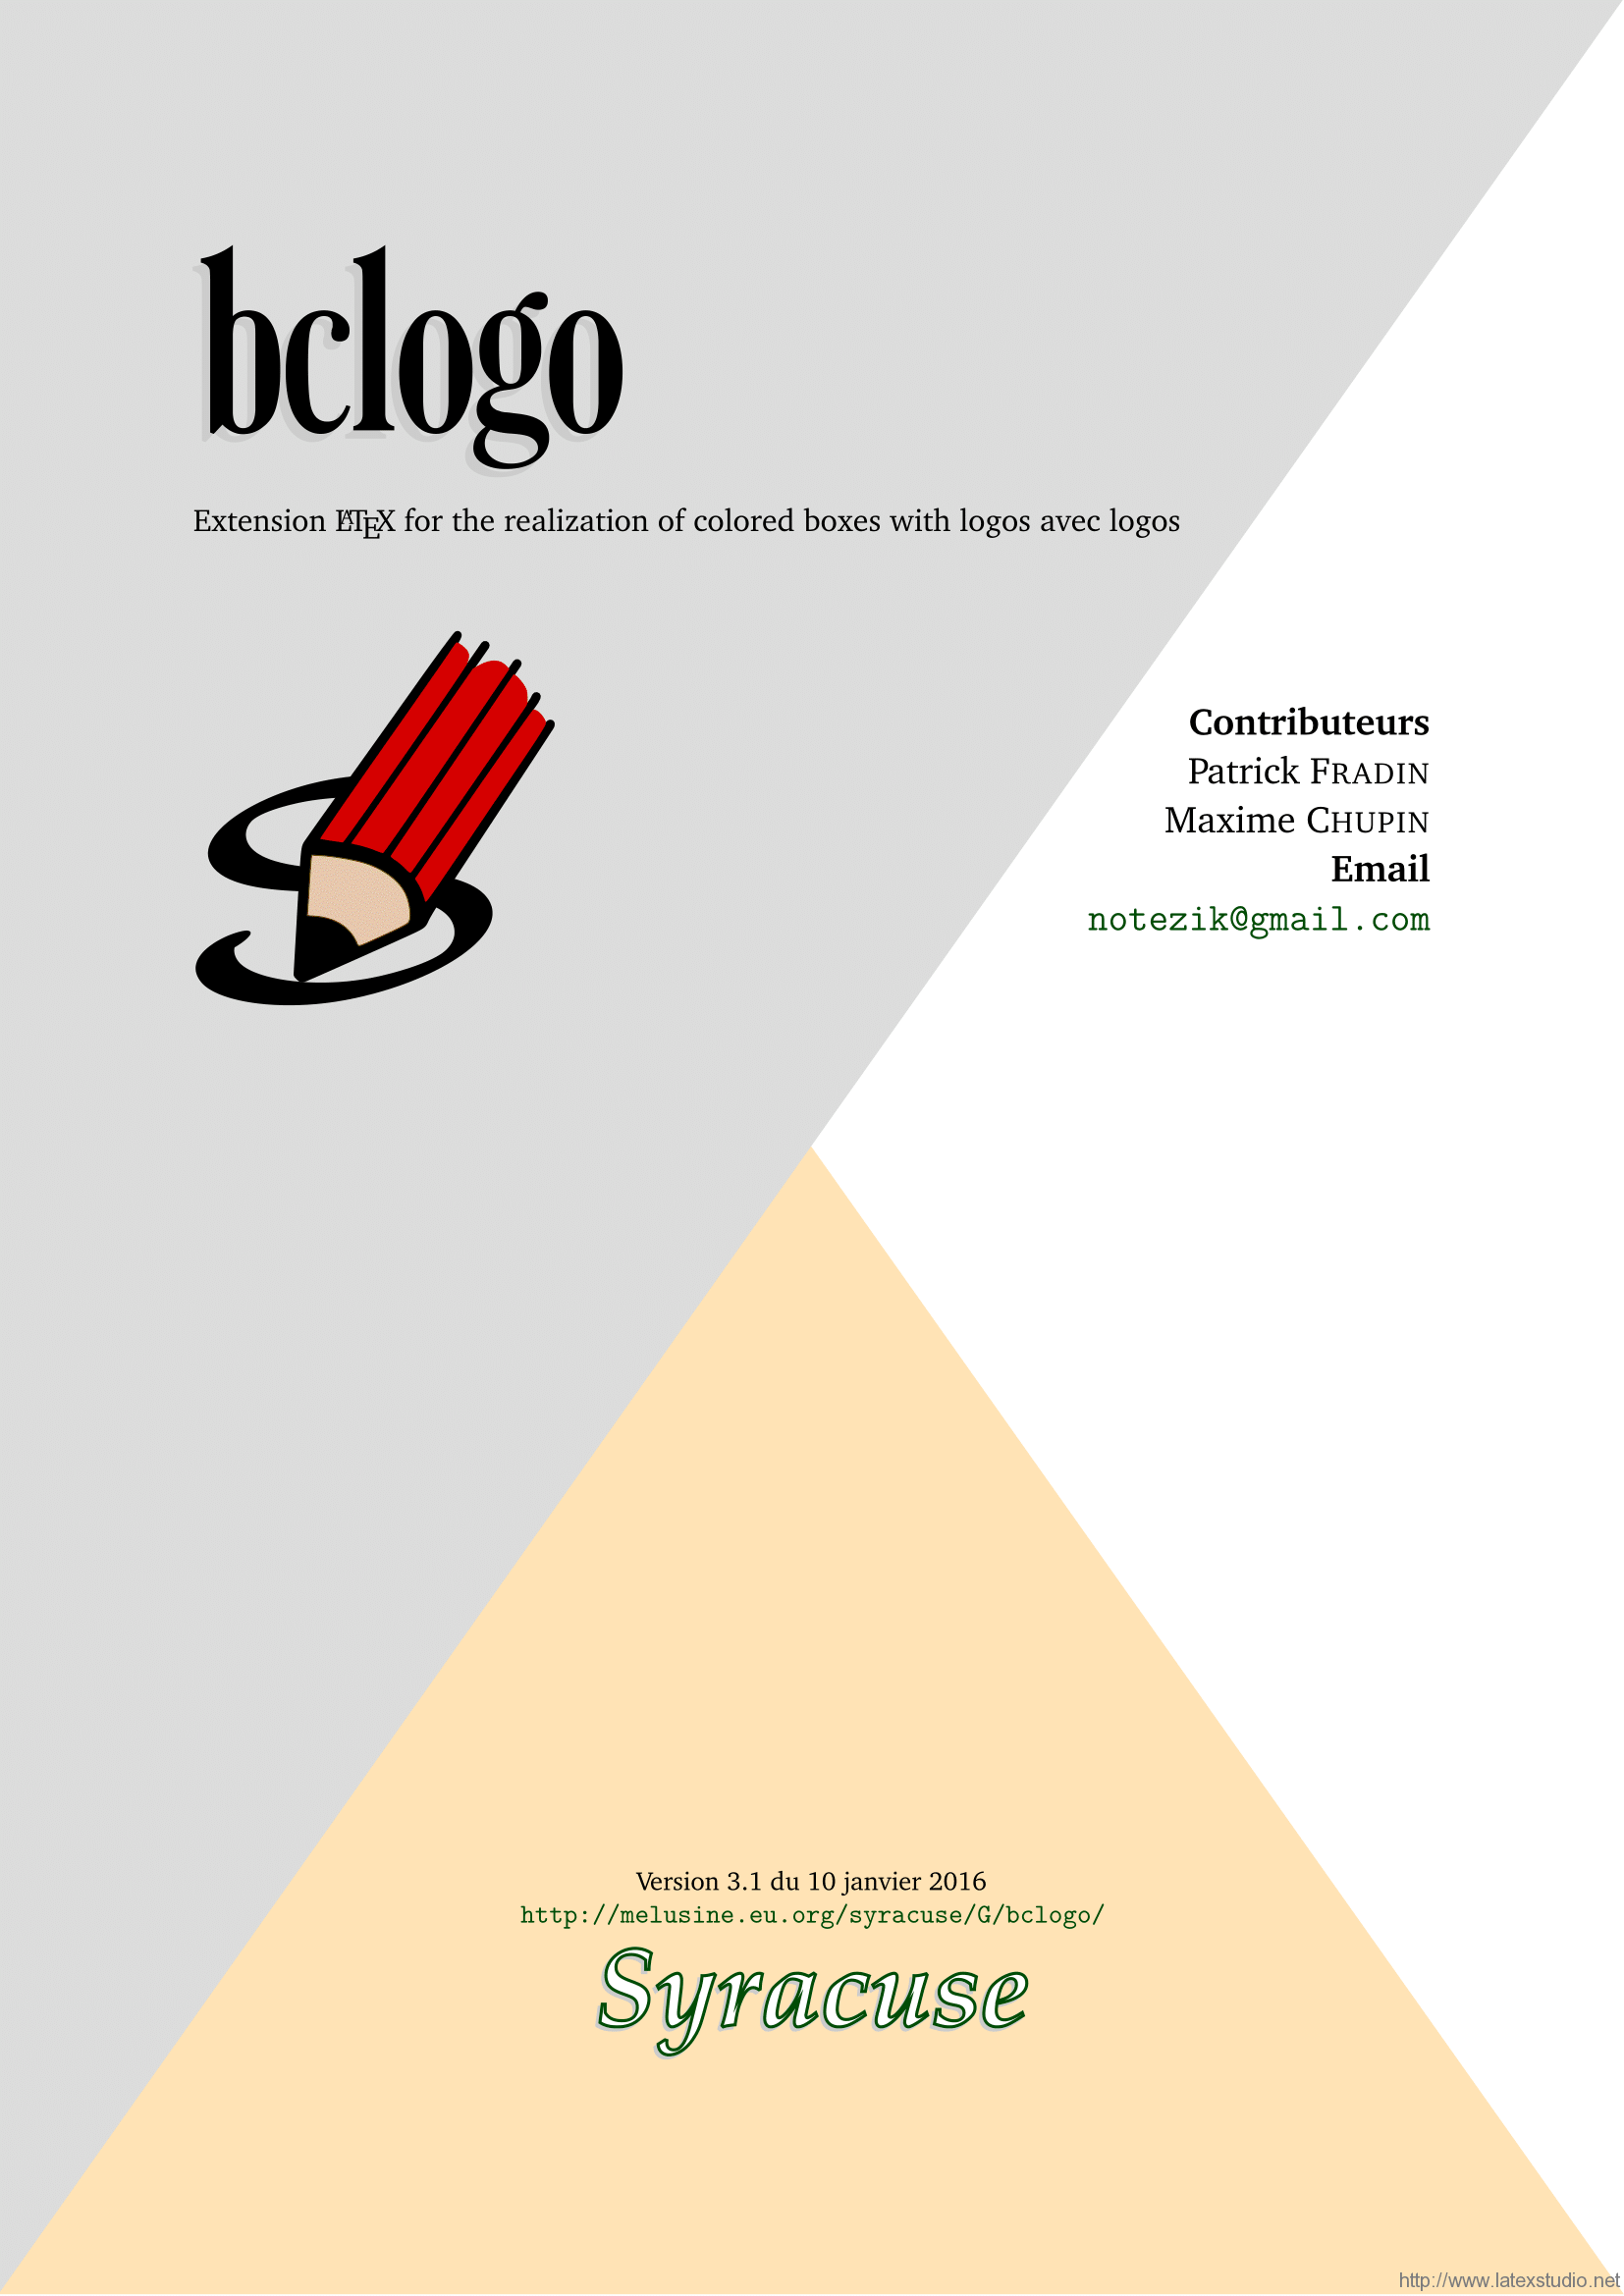 bclogo-cover-1